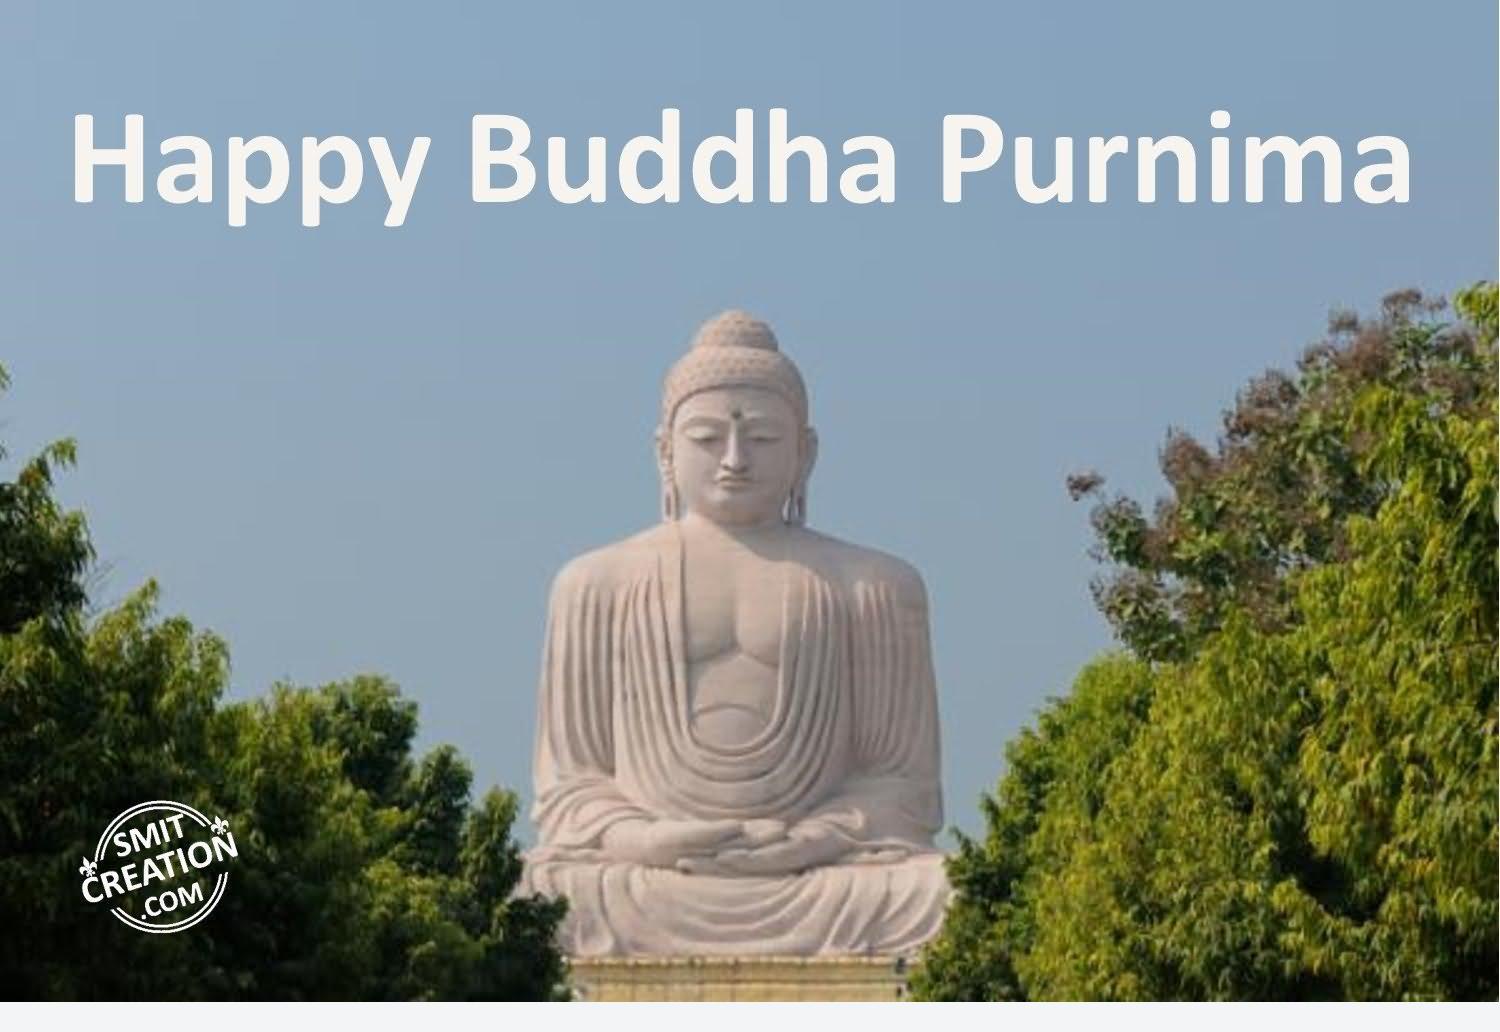 Happy Buddha Purnima To You And Your Family